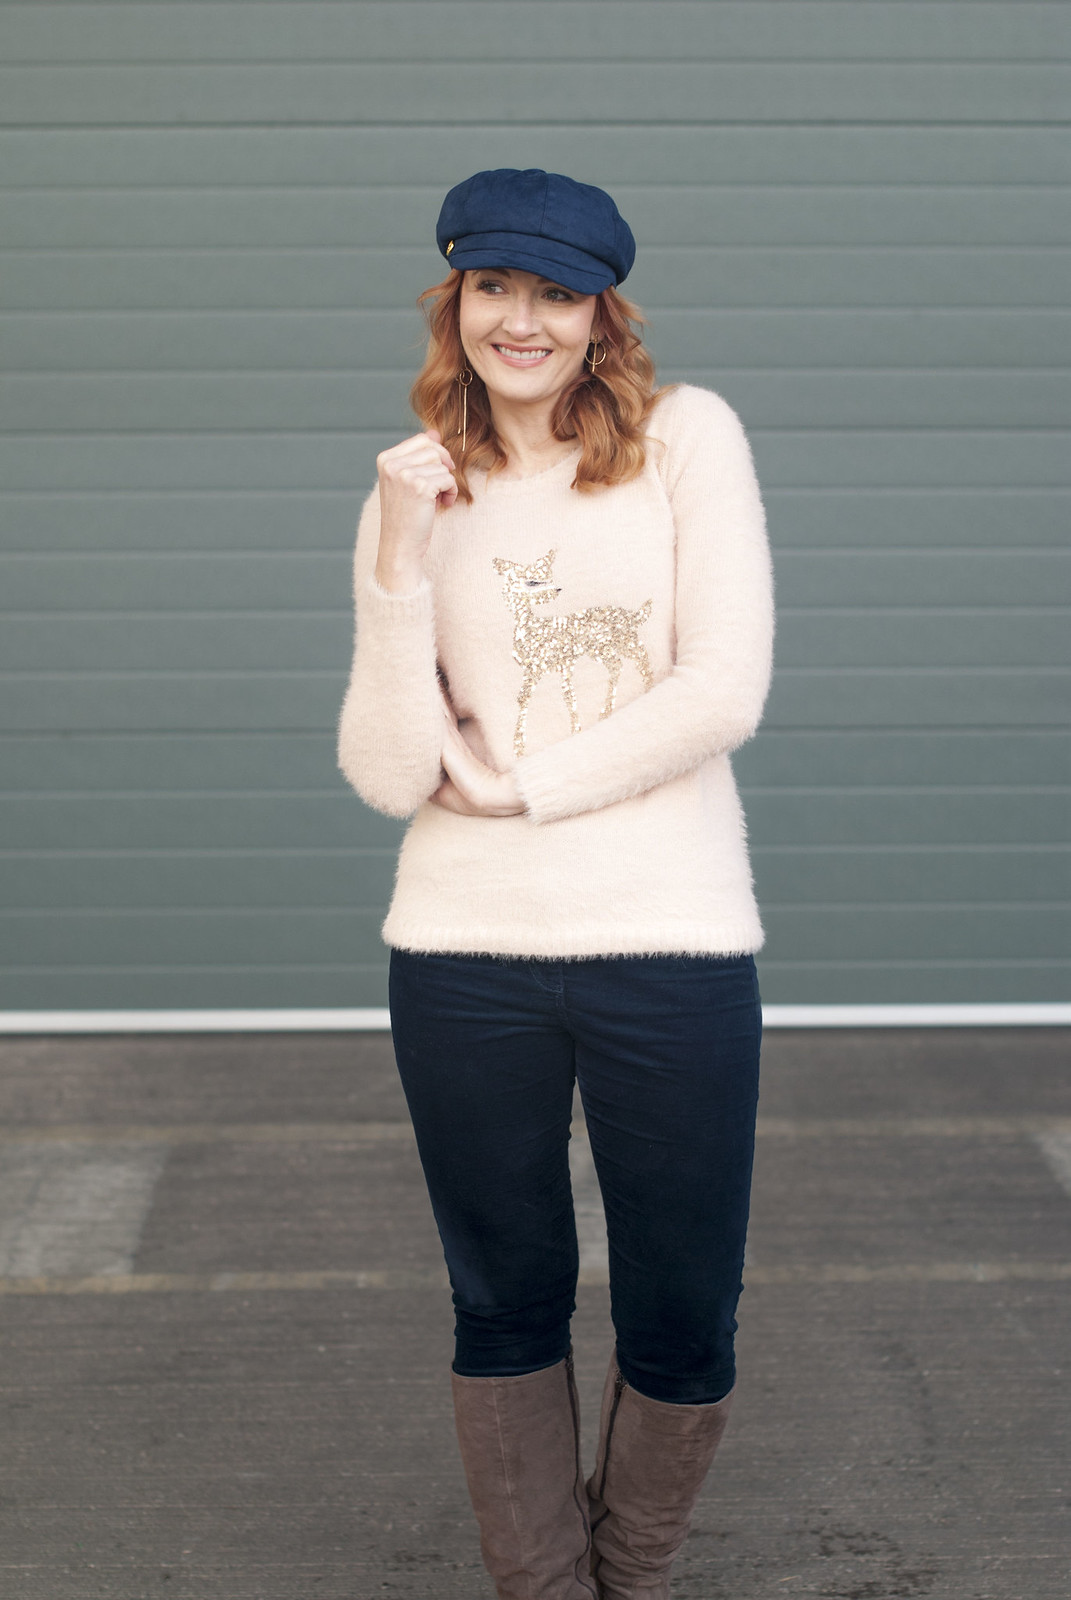 AW17 Casual Christmas party outfit: Fluffy pink sequinned reindeer sweater, navy velvet trousers, knee high boots and navy baker boy hat | Not Dressed As Lamb, over 40 style